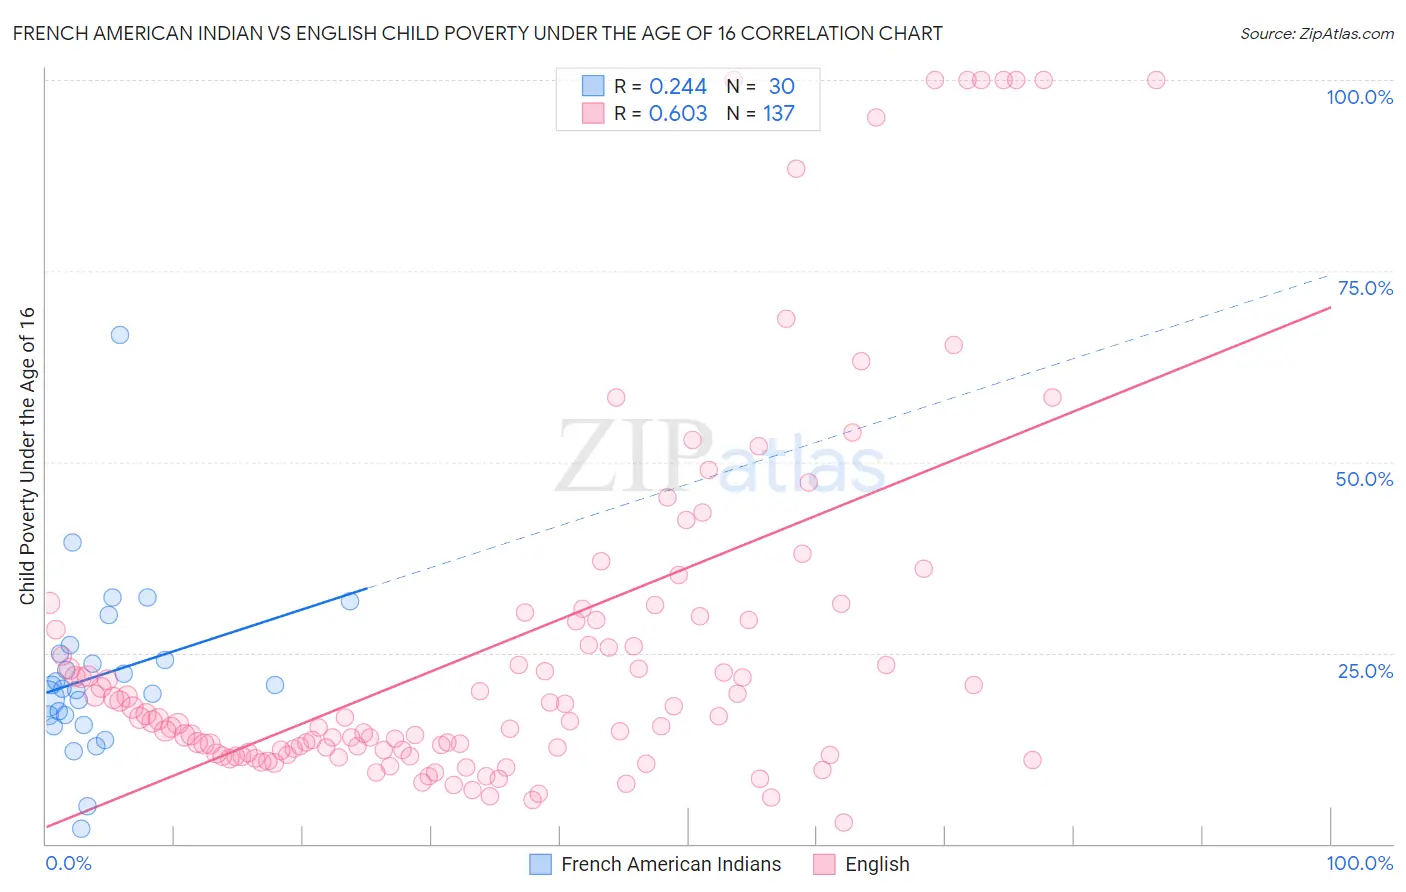 French American Indian vs English Child Poverty Under the Age of 16